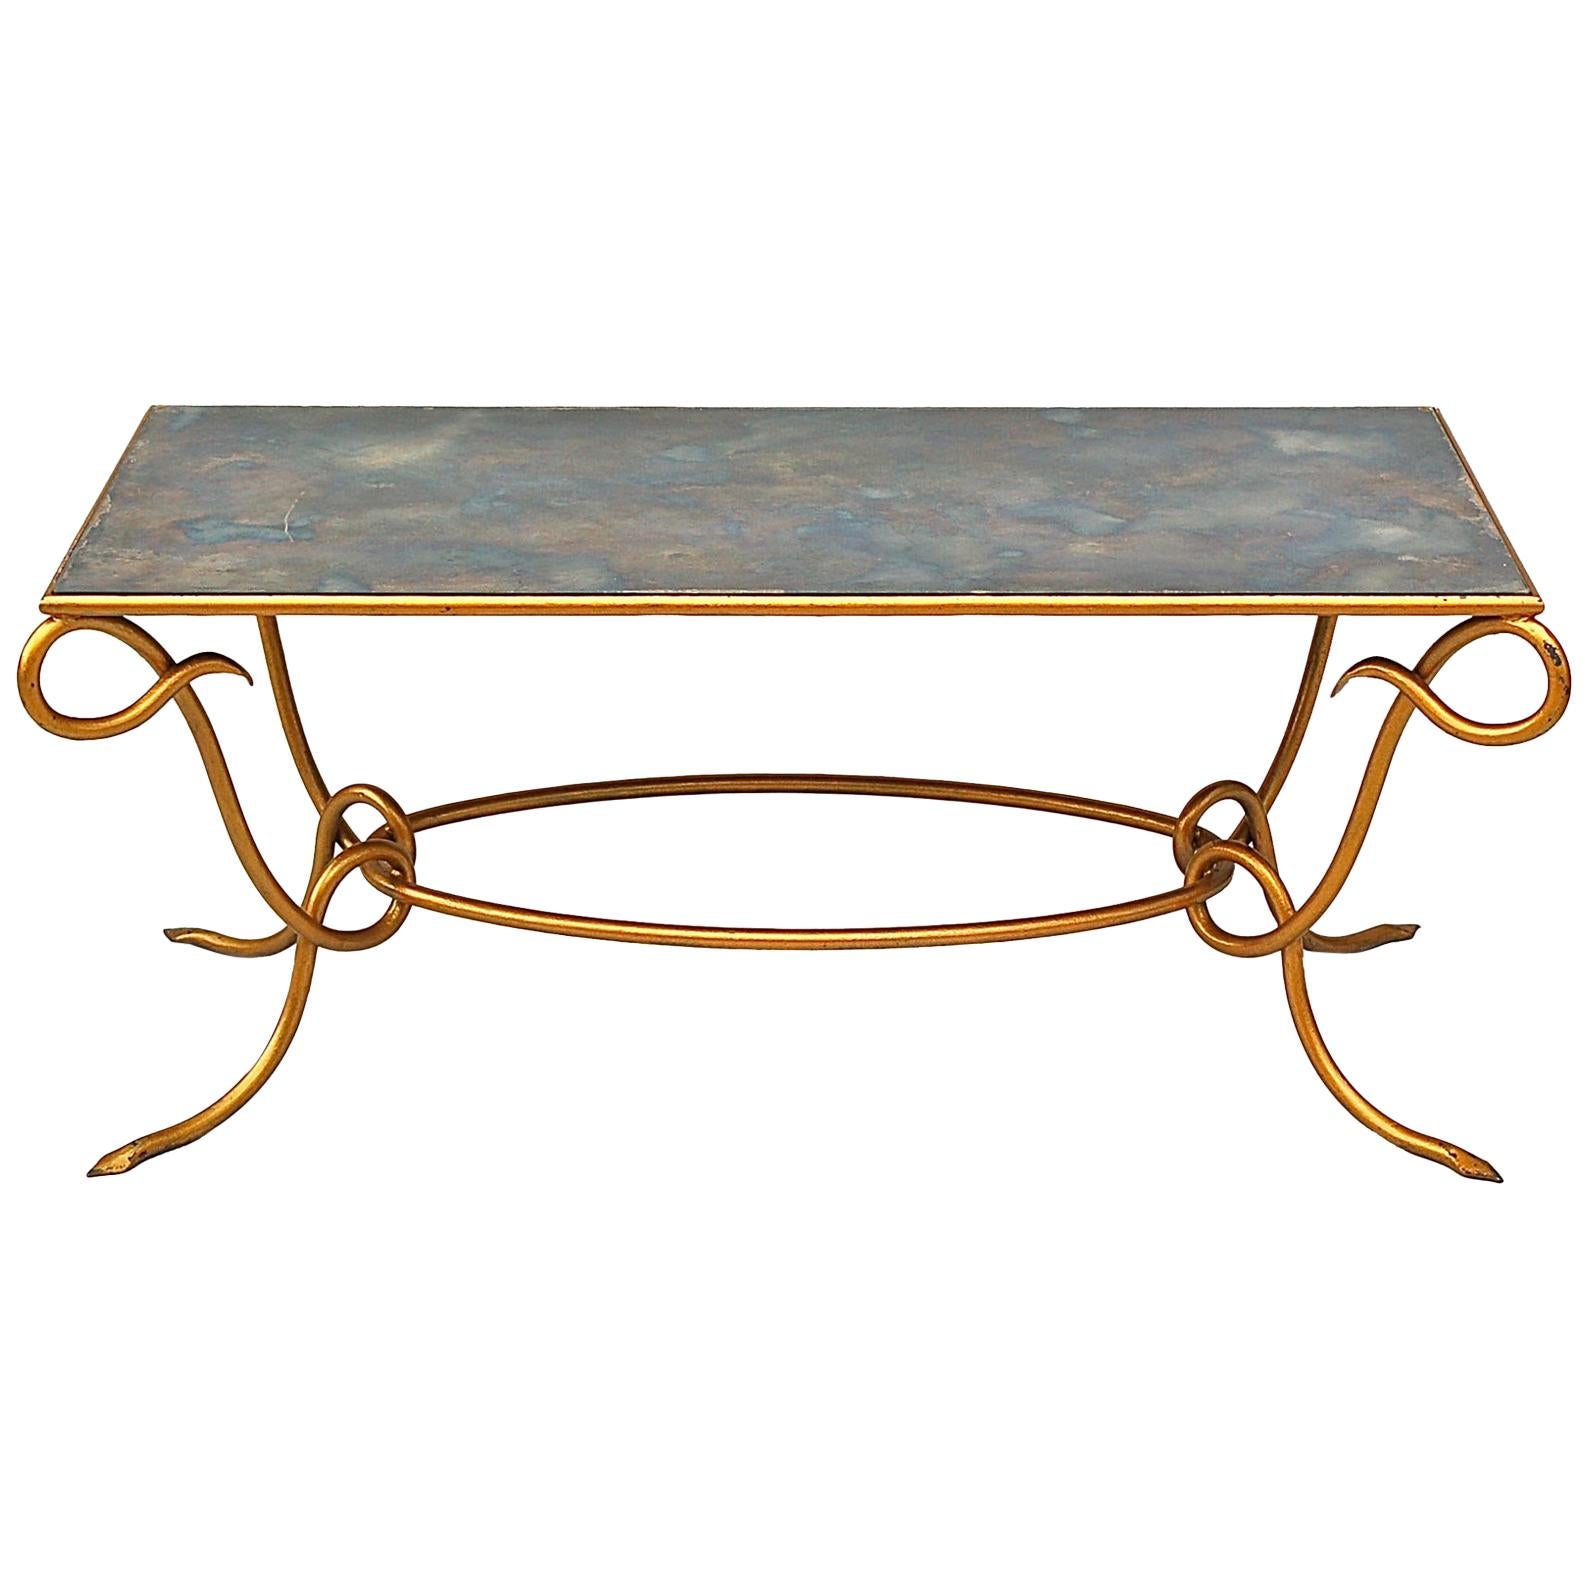 Gilt Coffee Table with Original Iridescent Mirrored Top by René Drouet For Sale